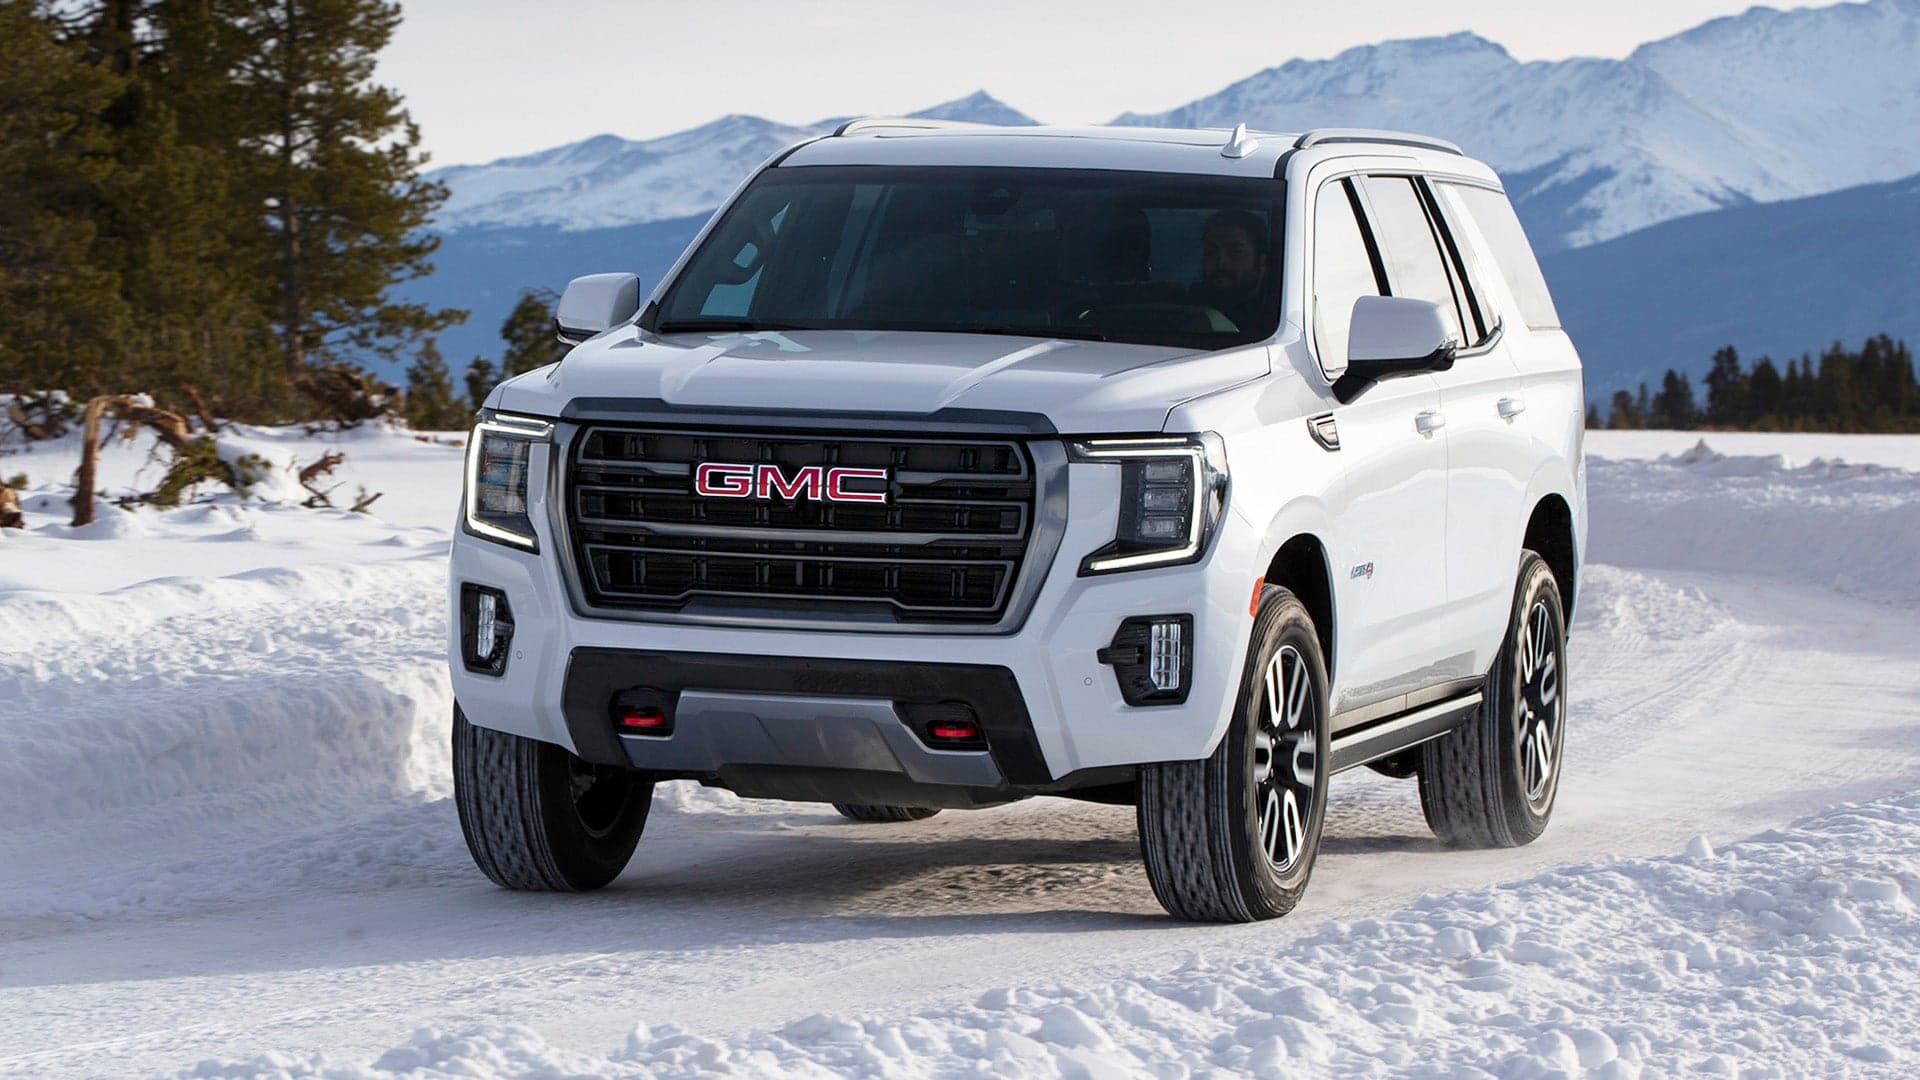 2021 GMC Yukon Can Spin Like a Top With Secret ‘Hurricane Turn’ Ability: Report